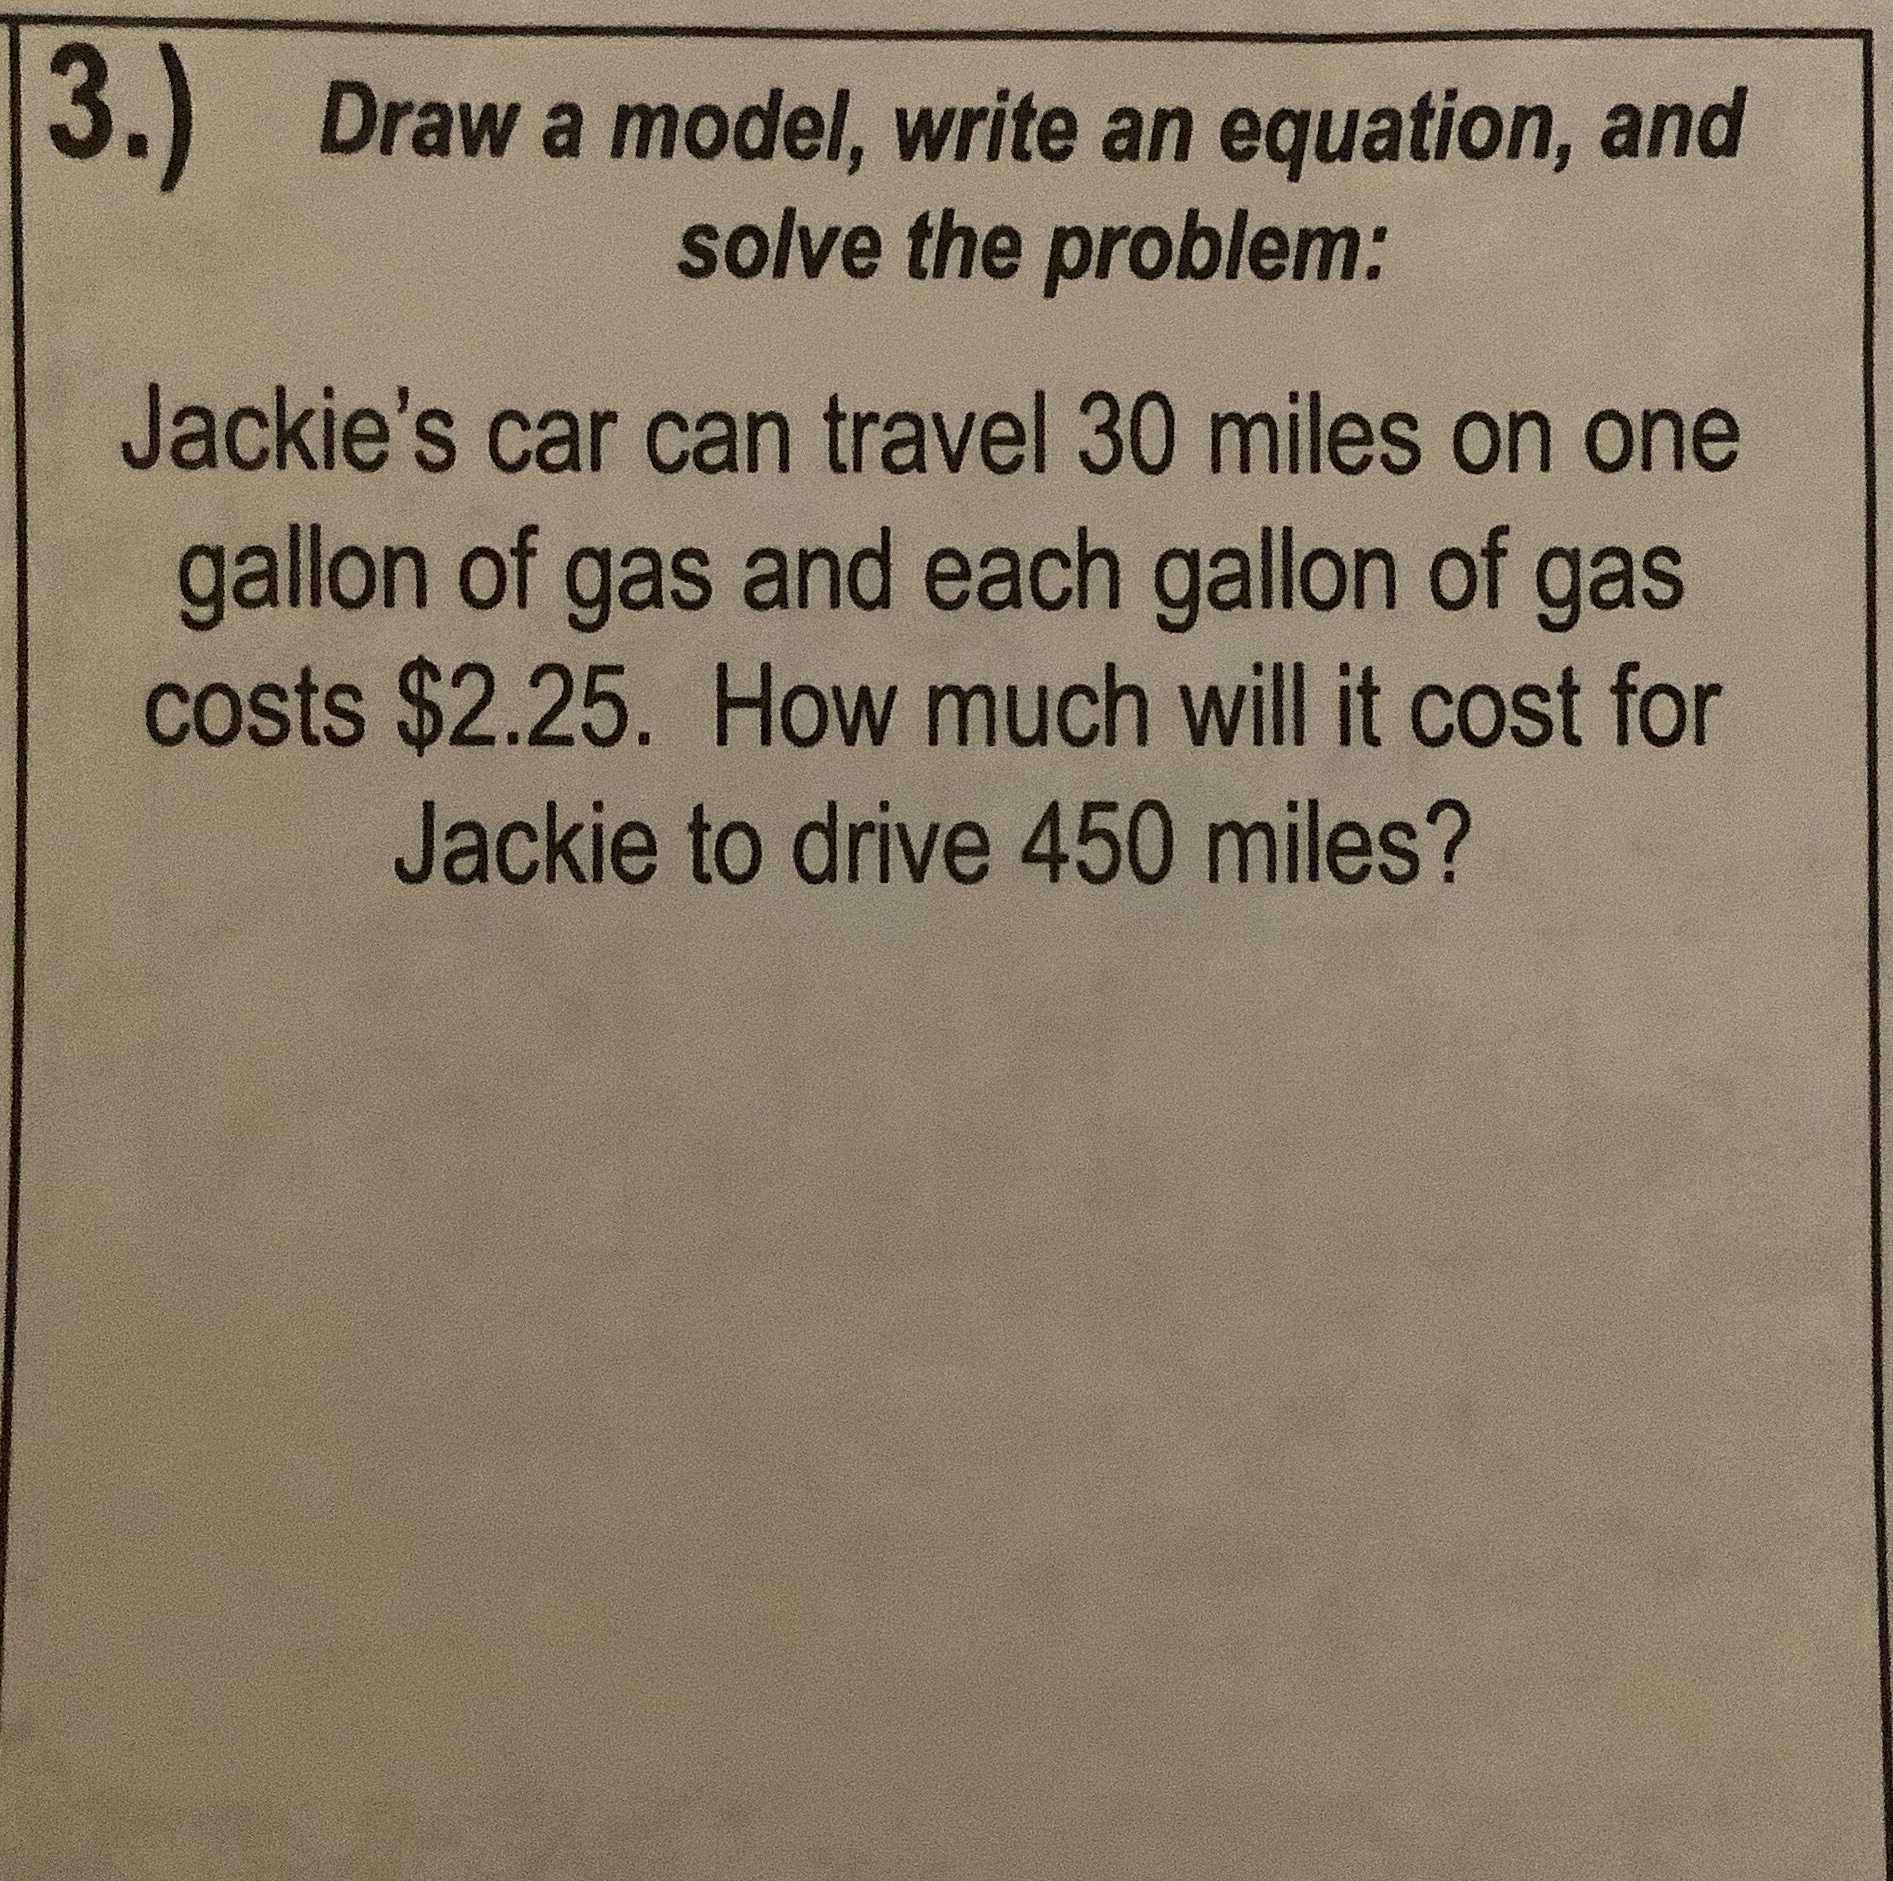 3.) Draw a model, write an equation, and solve the...